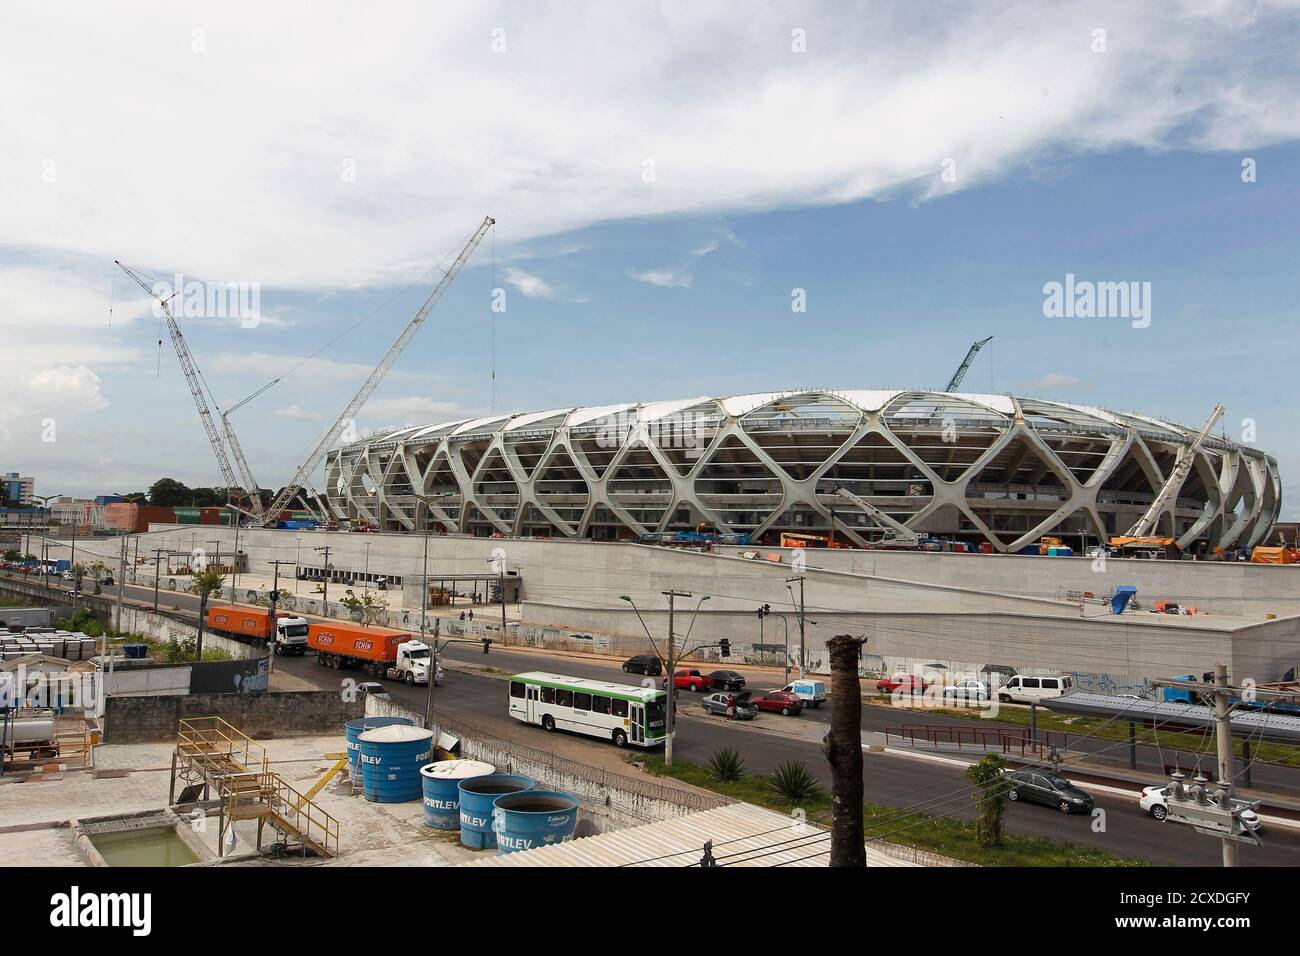 The Arena Amazonia stadium is under construction to host several 2014 World Cup soccer games, in Manaus December 14, 2013. Construction worker Marcleudo de Melo Ferreira fell to his death from the roof earlier in the day after a cable broke, adding to safety concerns as the country races to finish building in time to host the 2014 World Cup of soccer. REUTERS/Bruno Kelly (BRAZIL - Tags: SPORT SOCCER WORLD CUP DISASTER BUSINESS CONSTRUCTION) Stock Photo